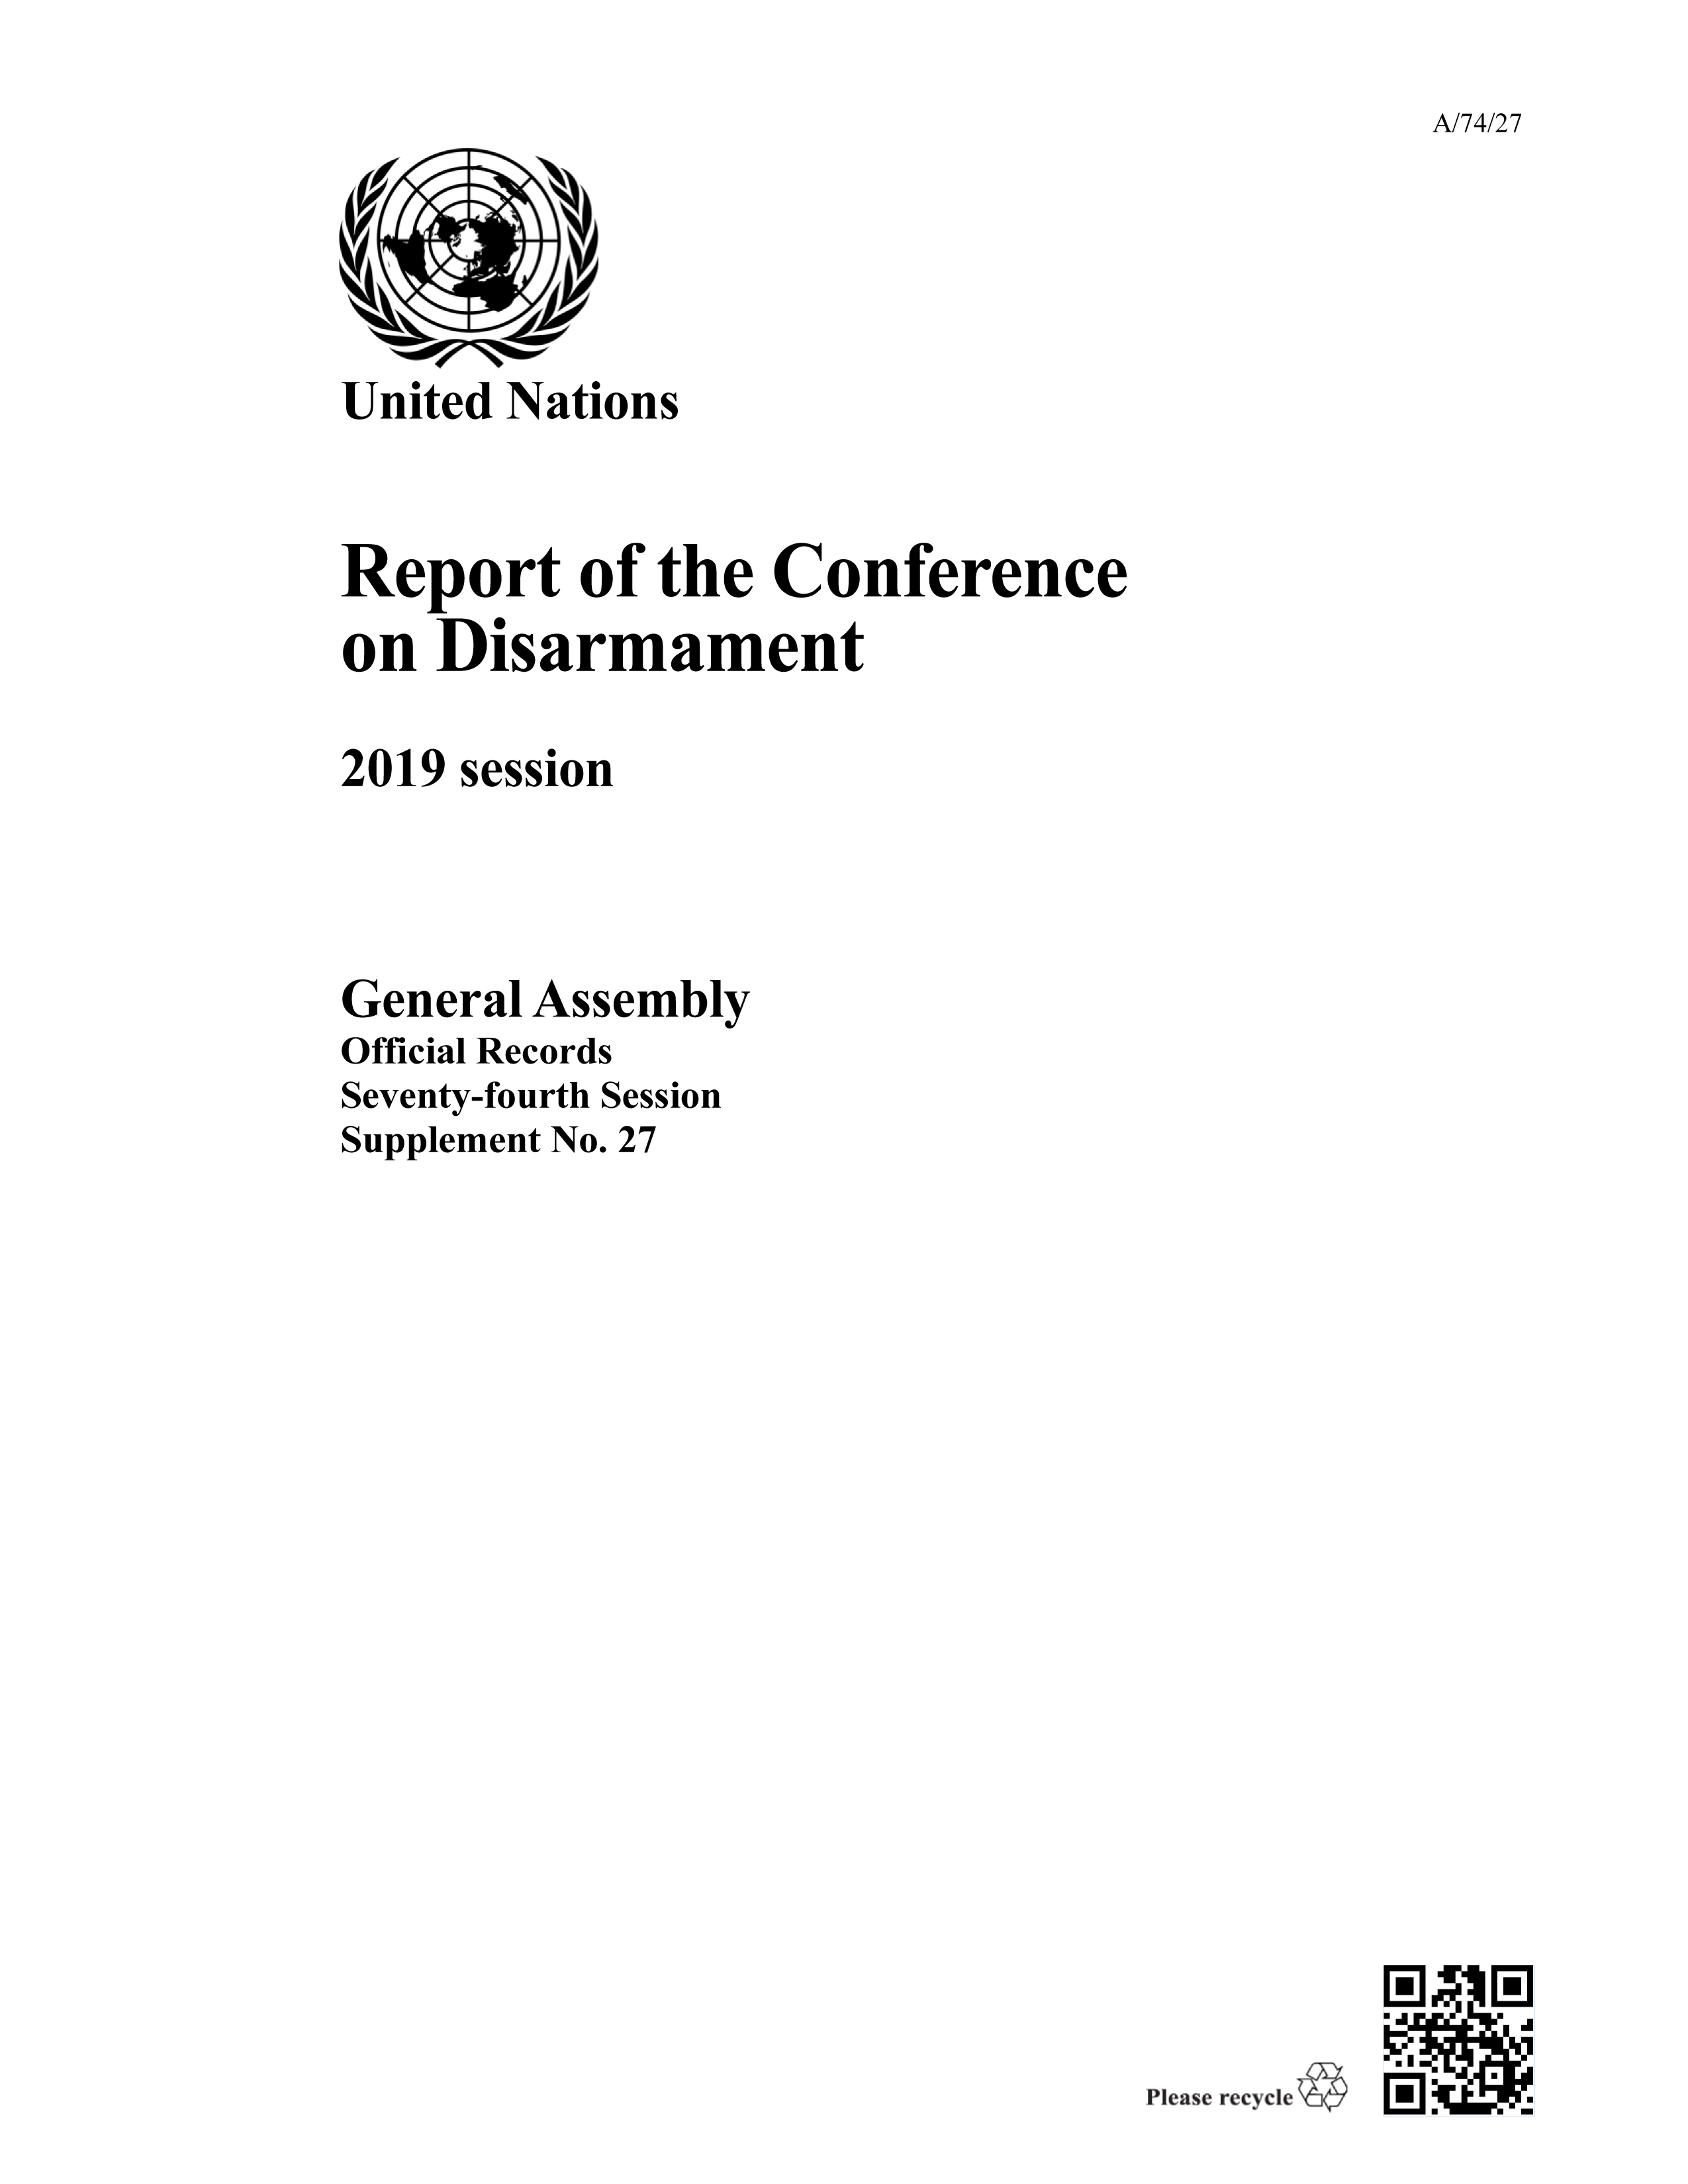 image of Report of the Conference on Disarmament: 2019 Session